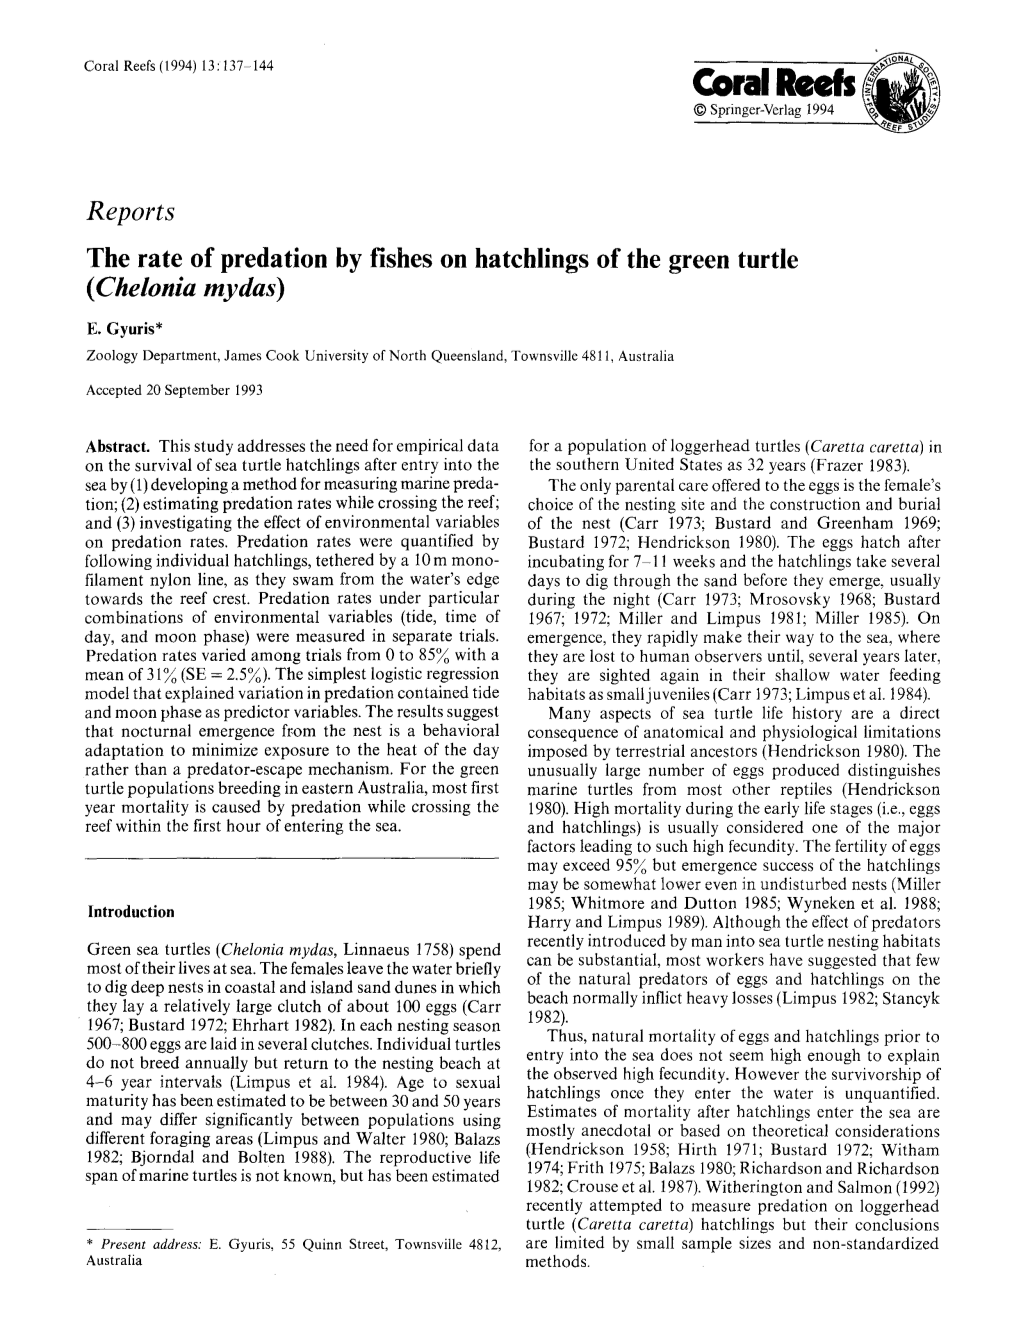 The Rate of Predation by Fishes on Hatchlings of the Green Turtle